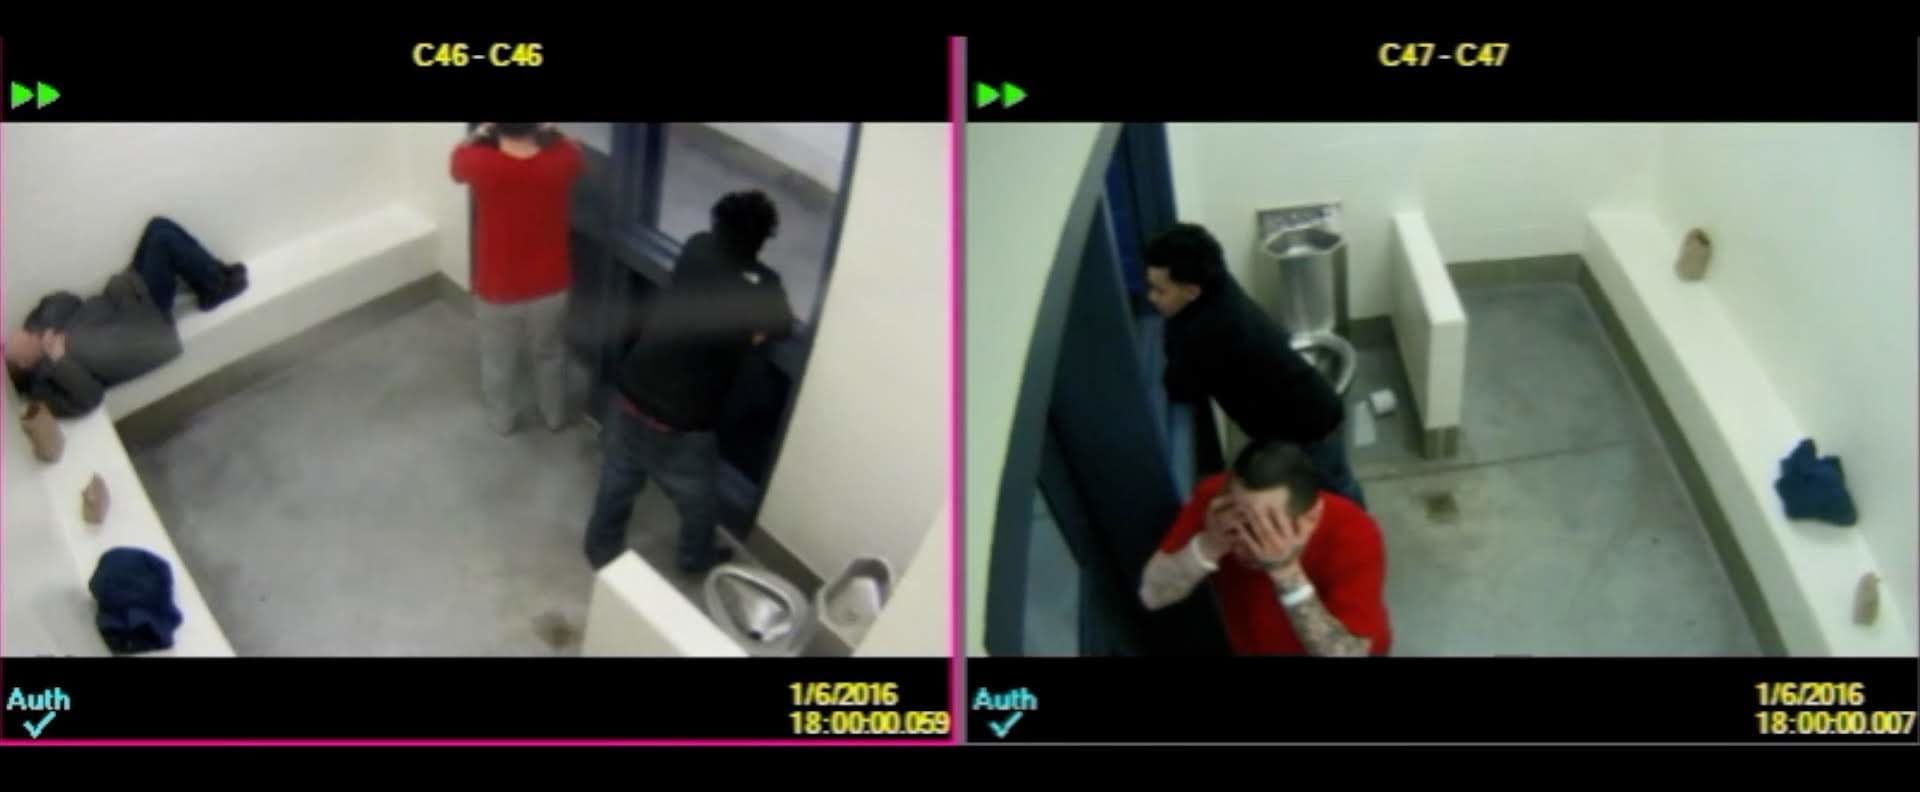 Screenshots of video show Sam Dunn, in the red shirt, inside a group cell at the Essex County jail prior to being transported to a treatment center in Bridgewater. (Essex County sheriff’s office)